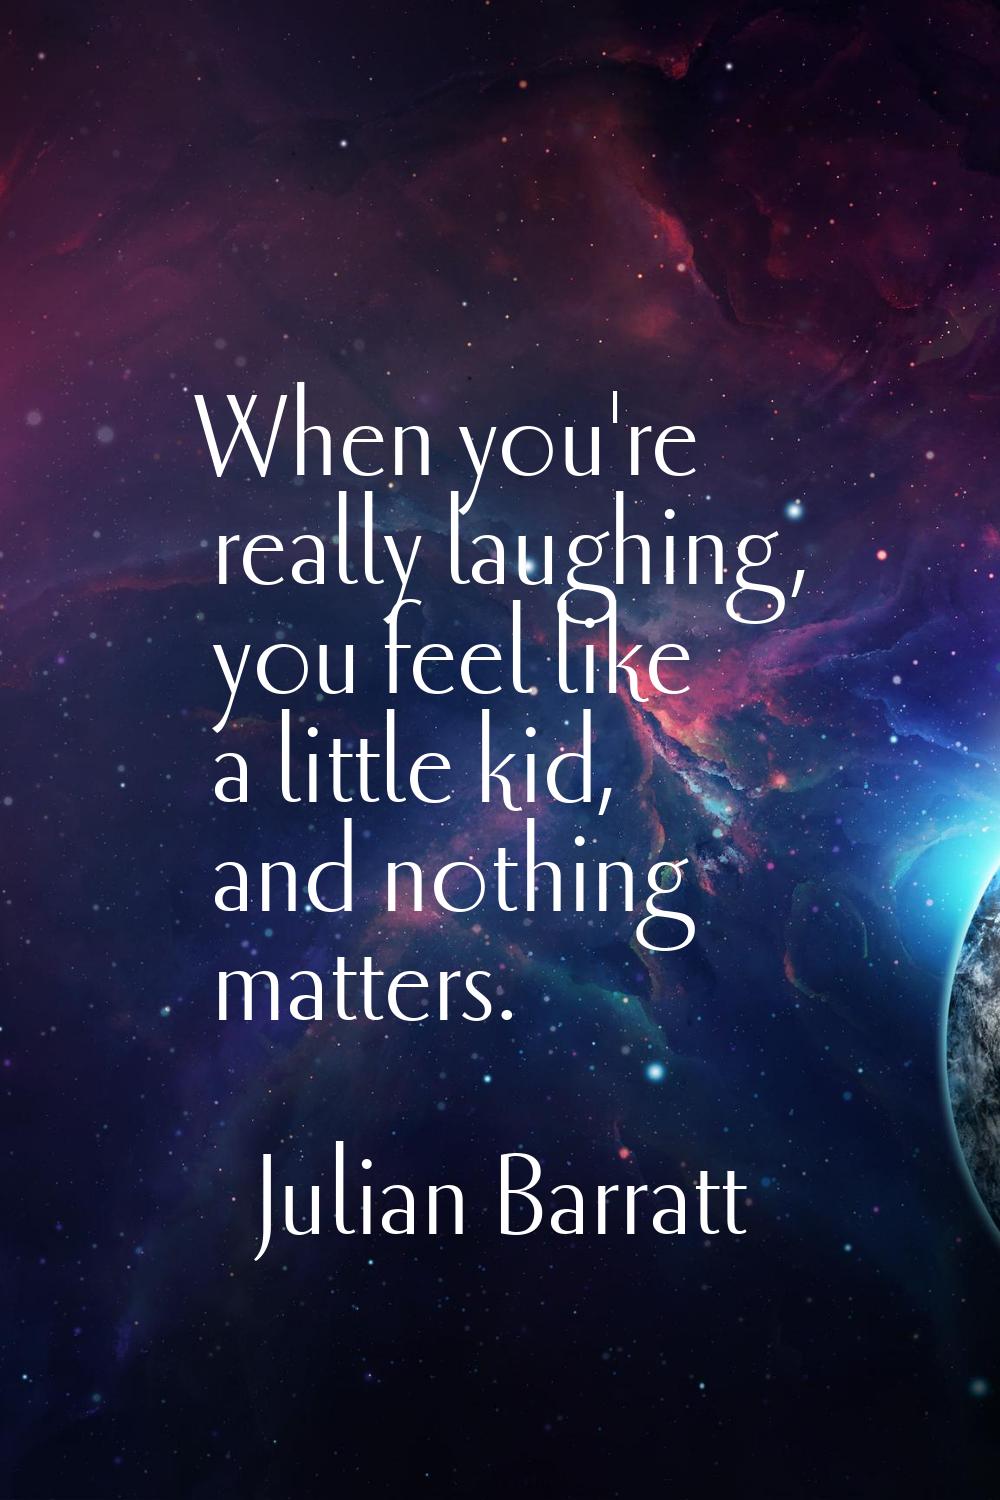 When you're really laughing, you feel like a little kid, and nothing matters.